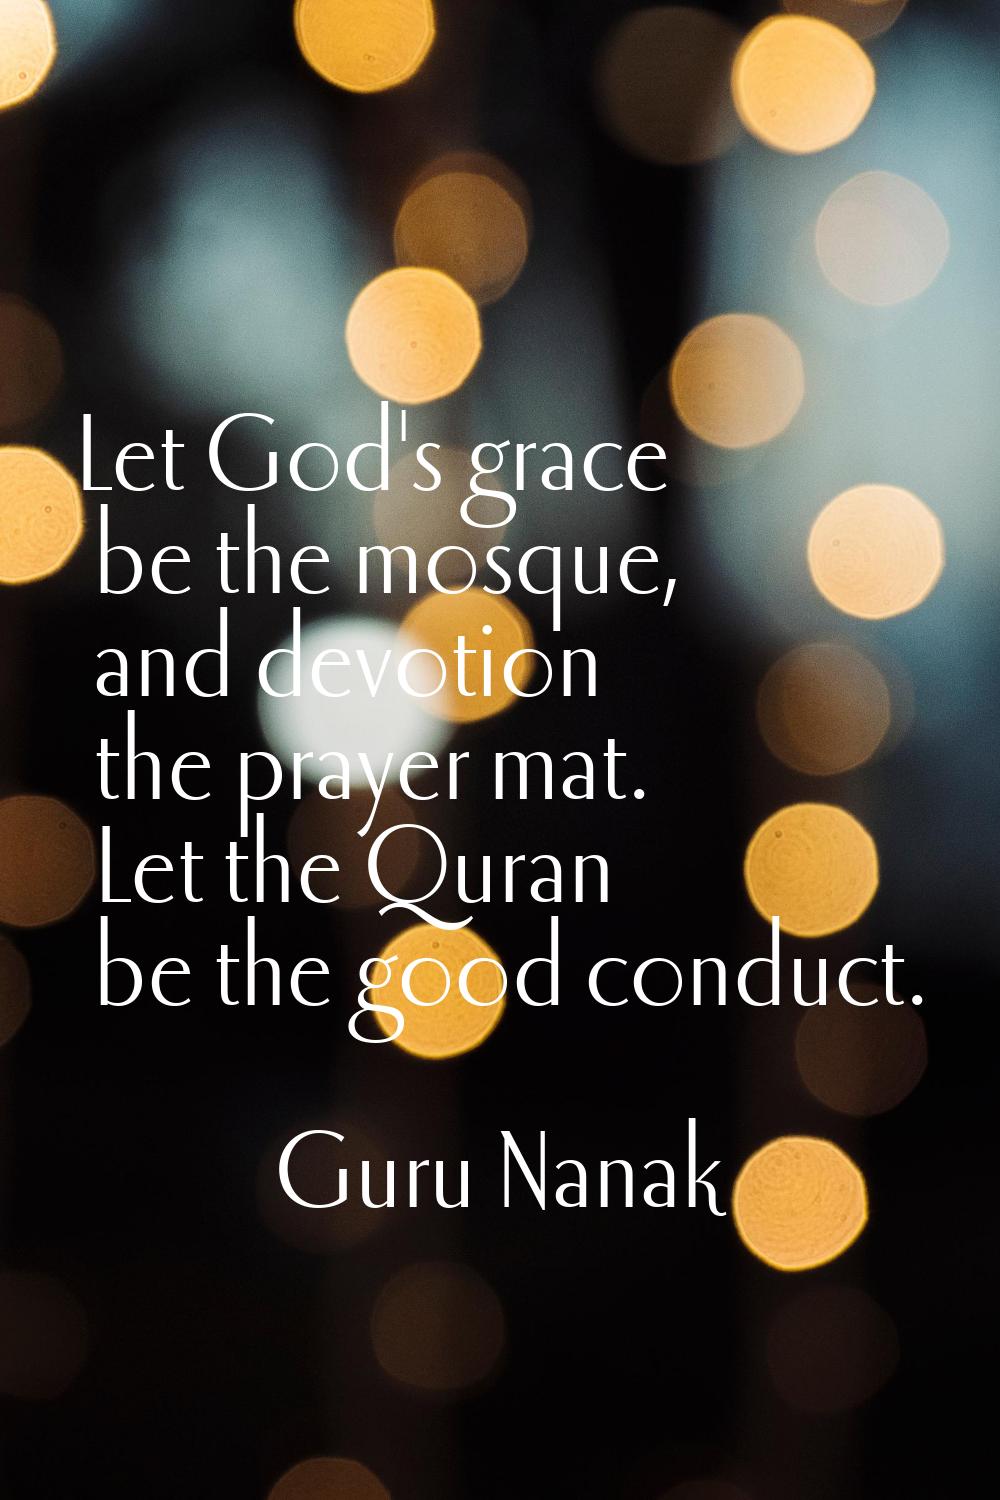 Let God's grace be the mosque, and devotion the prayer mat. Let the Quran be the good conduct.